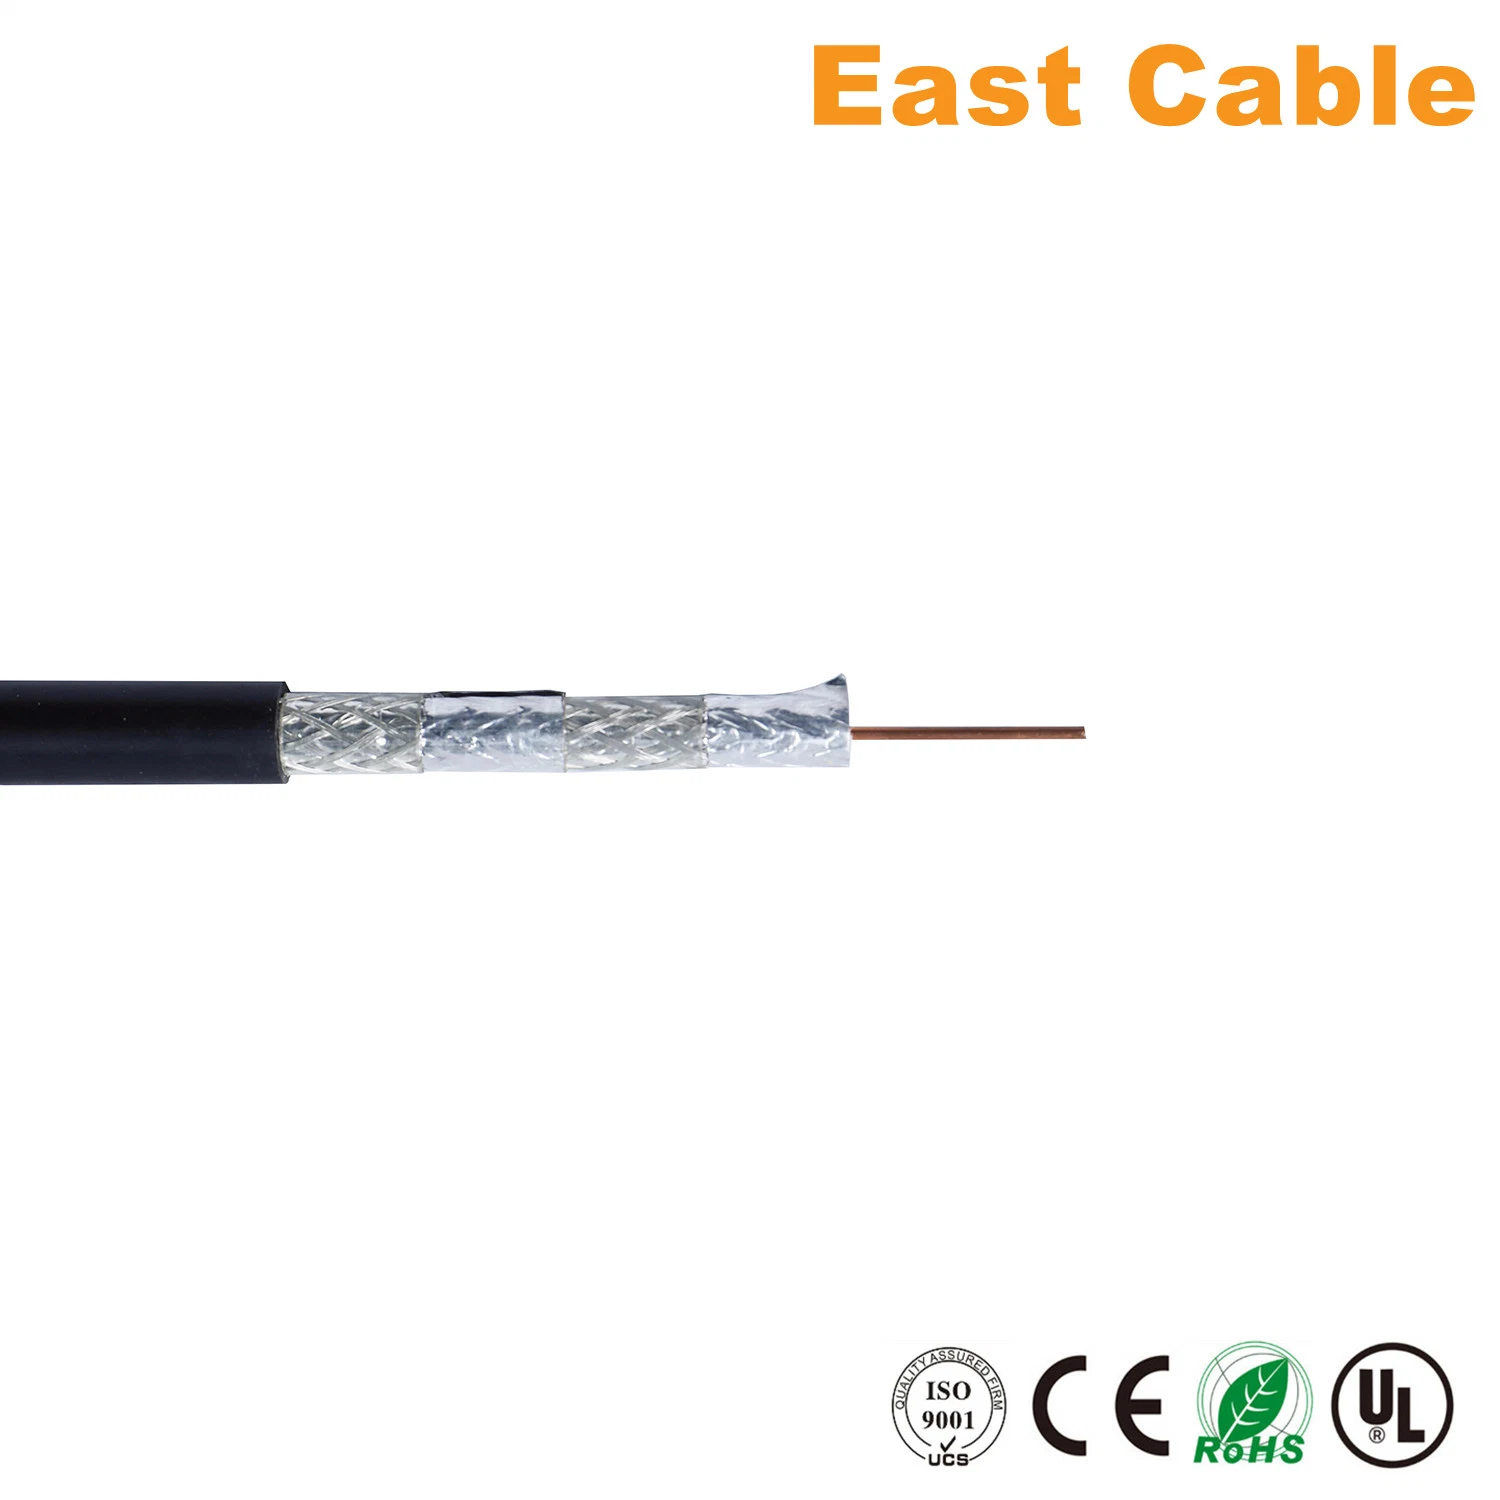 Coaxial Cable RG6 for Setellite/Monitor/CCTV/CATV